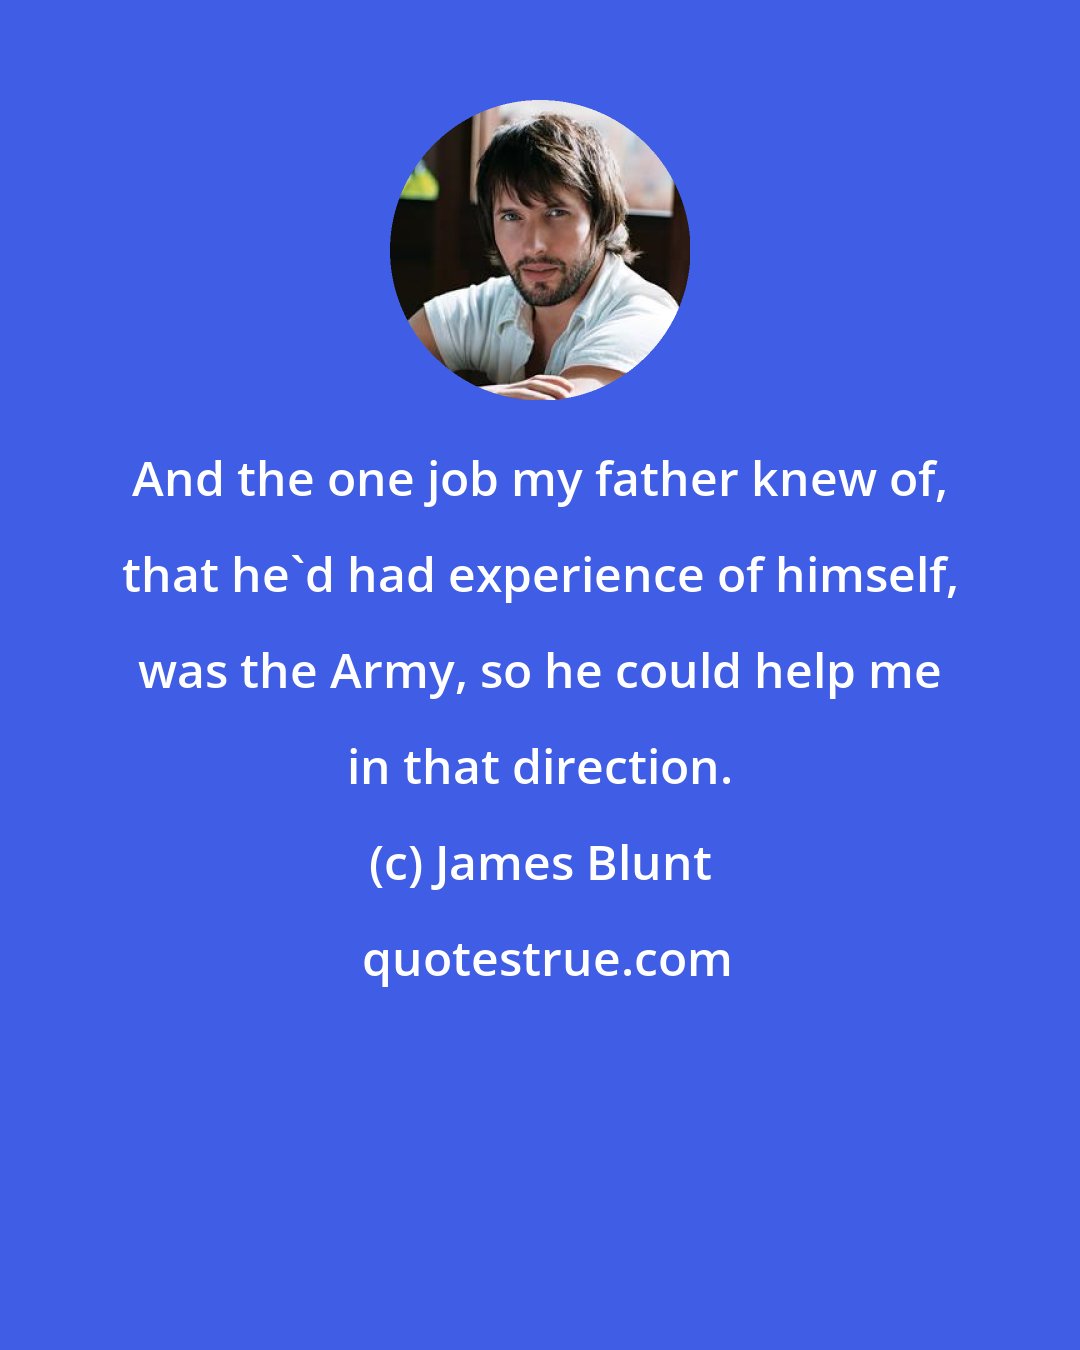 James Blunt: And the one job my father knew of, that he'd had experience of himself, was the Army, so he could help me in that direction.